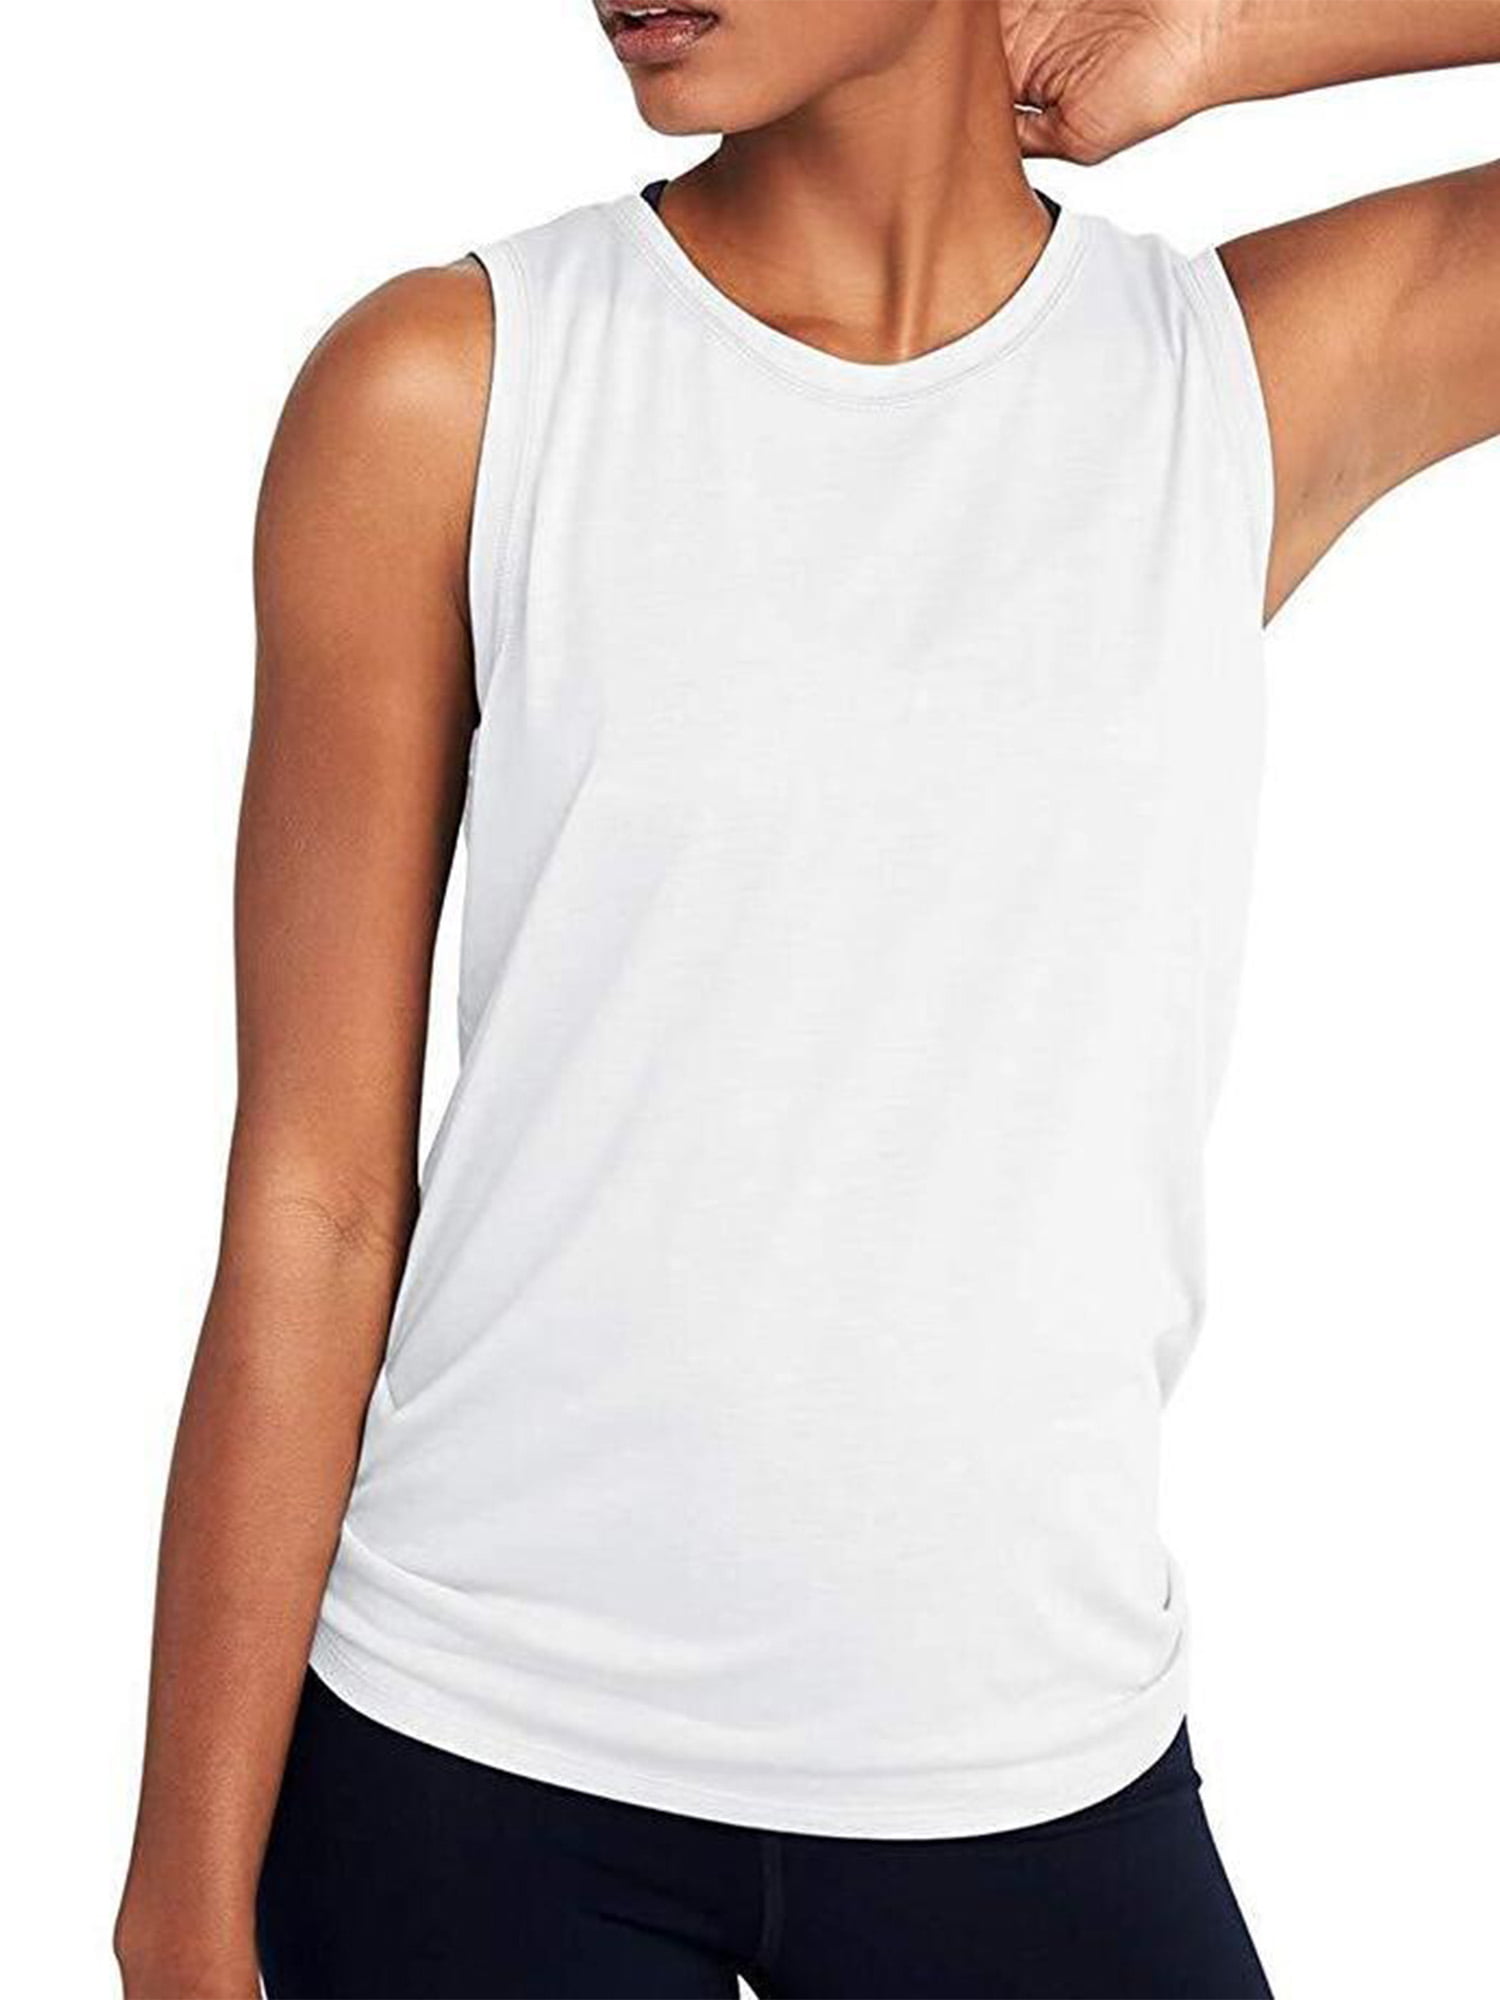 CNJUYEE Yoga Tops for Women Activewear Workout Tank Tops Athletic Women’s Sleeveless Tops Open Back Running Sports Shirts 